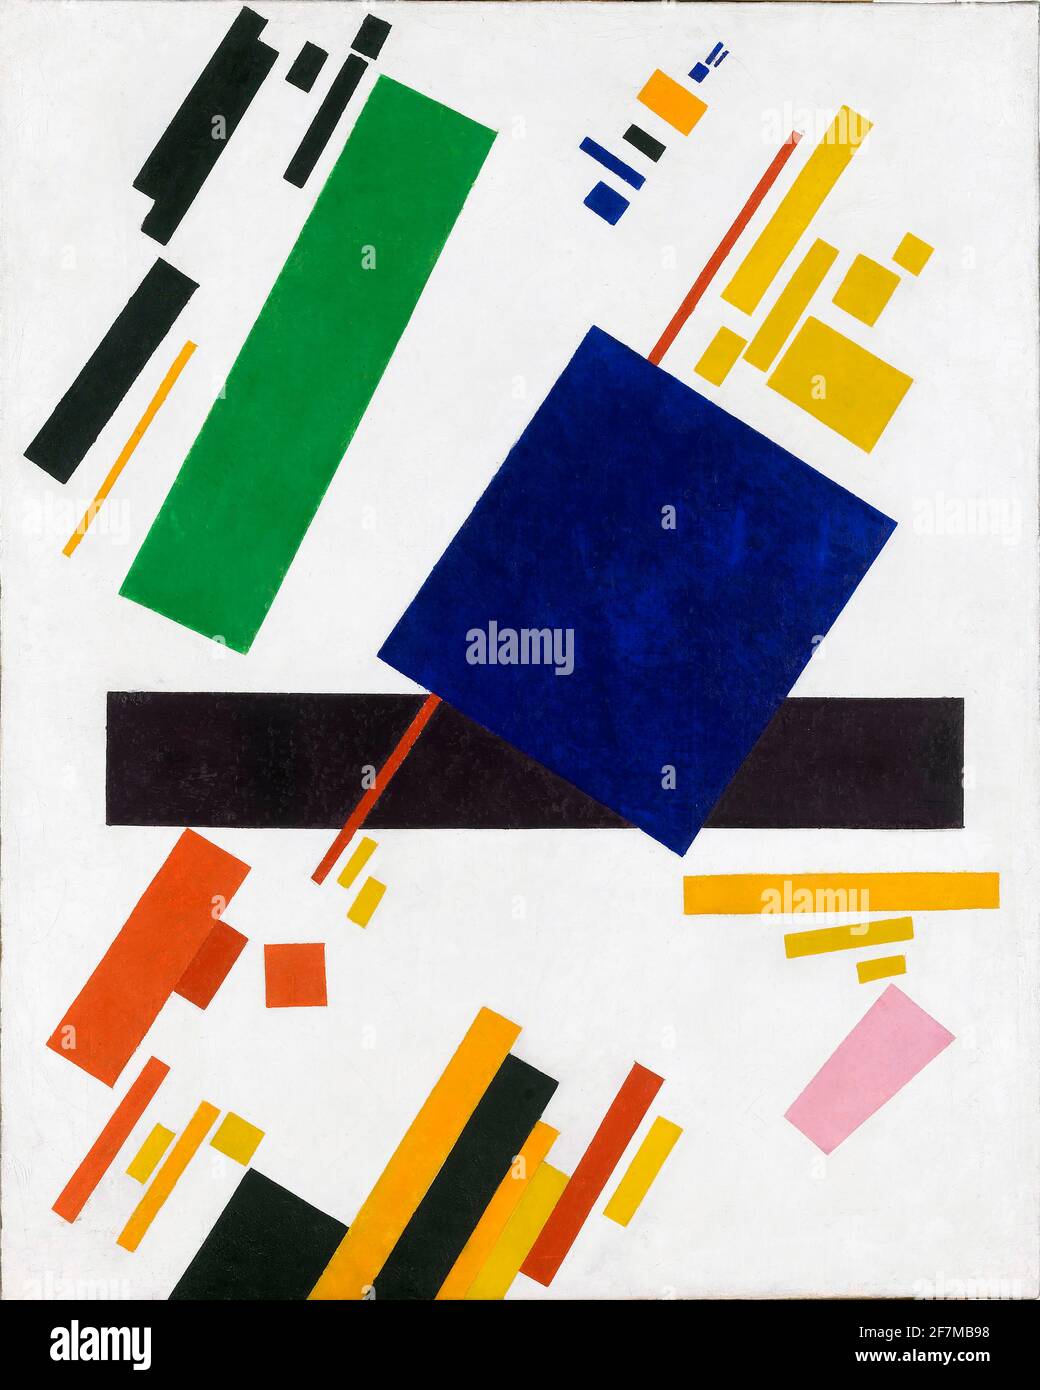 Kazimir Malevich. Painting entitled "Suprematist Composition" by the Russian avant-garde artist,  Kazimir Severinovich Malevich (1879-1935),  oil on canvas, 1915 Stock Photo